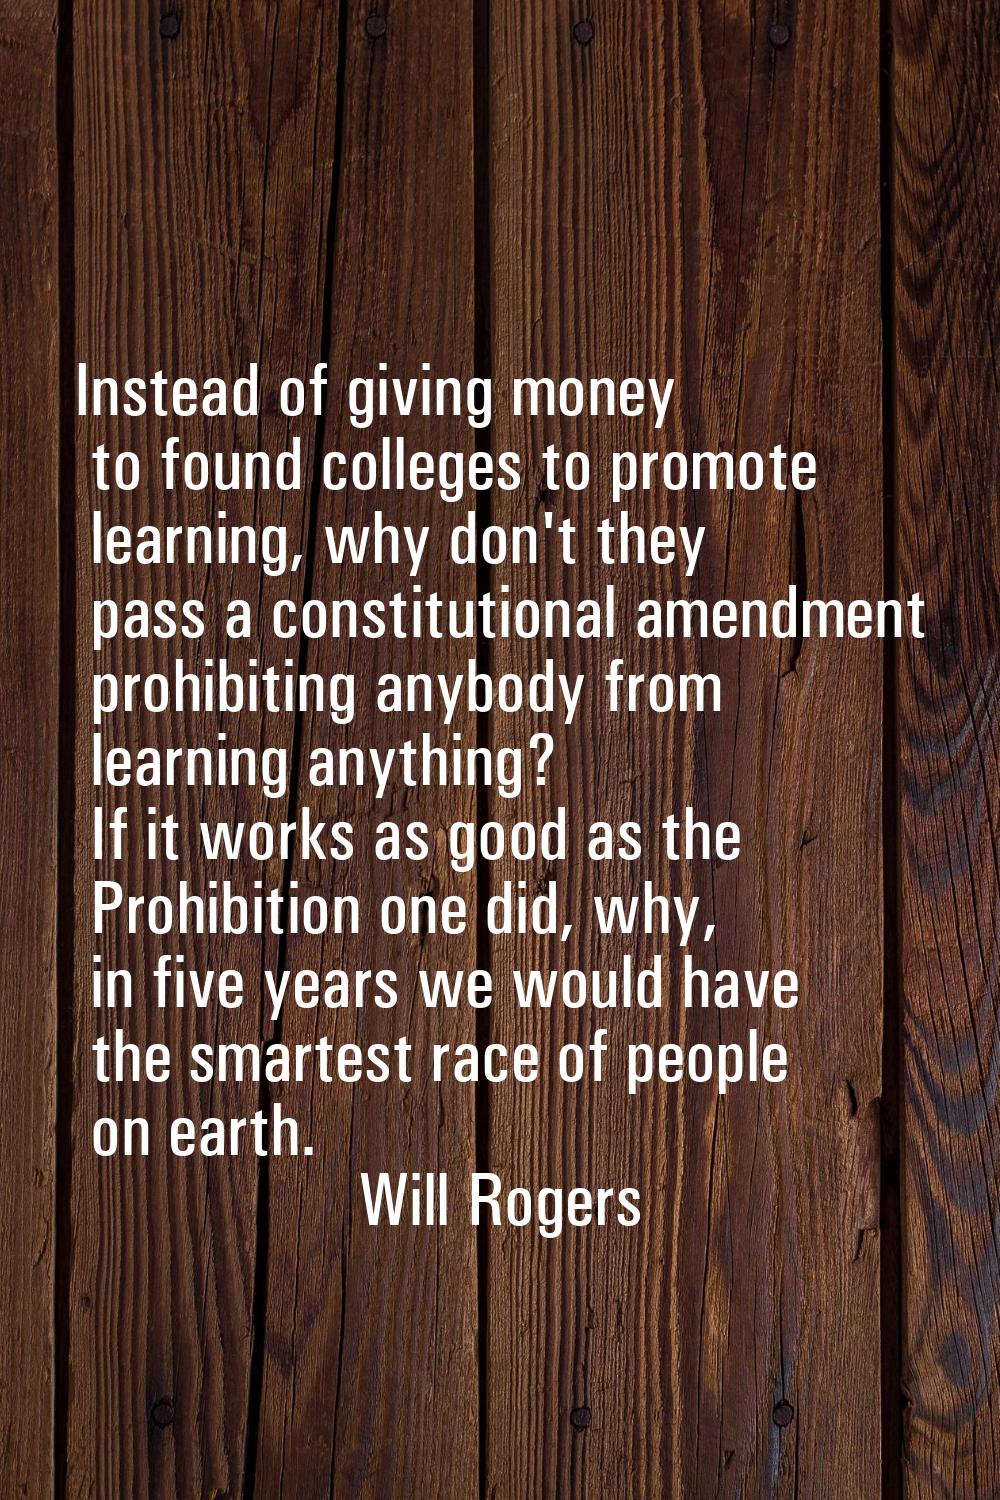 Instead of giving money to found colleges to promote learning, why don't they pass a constitutional